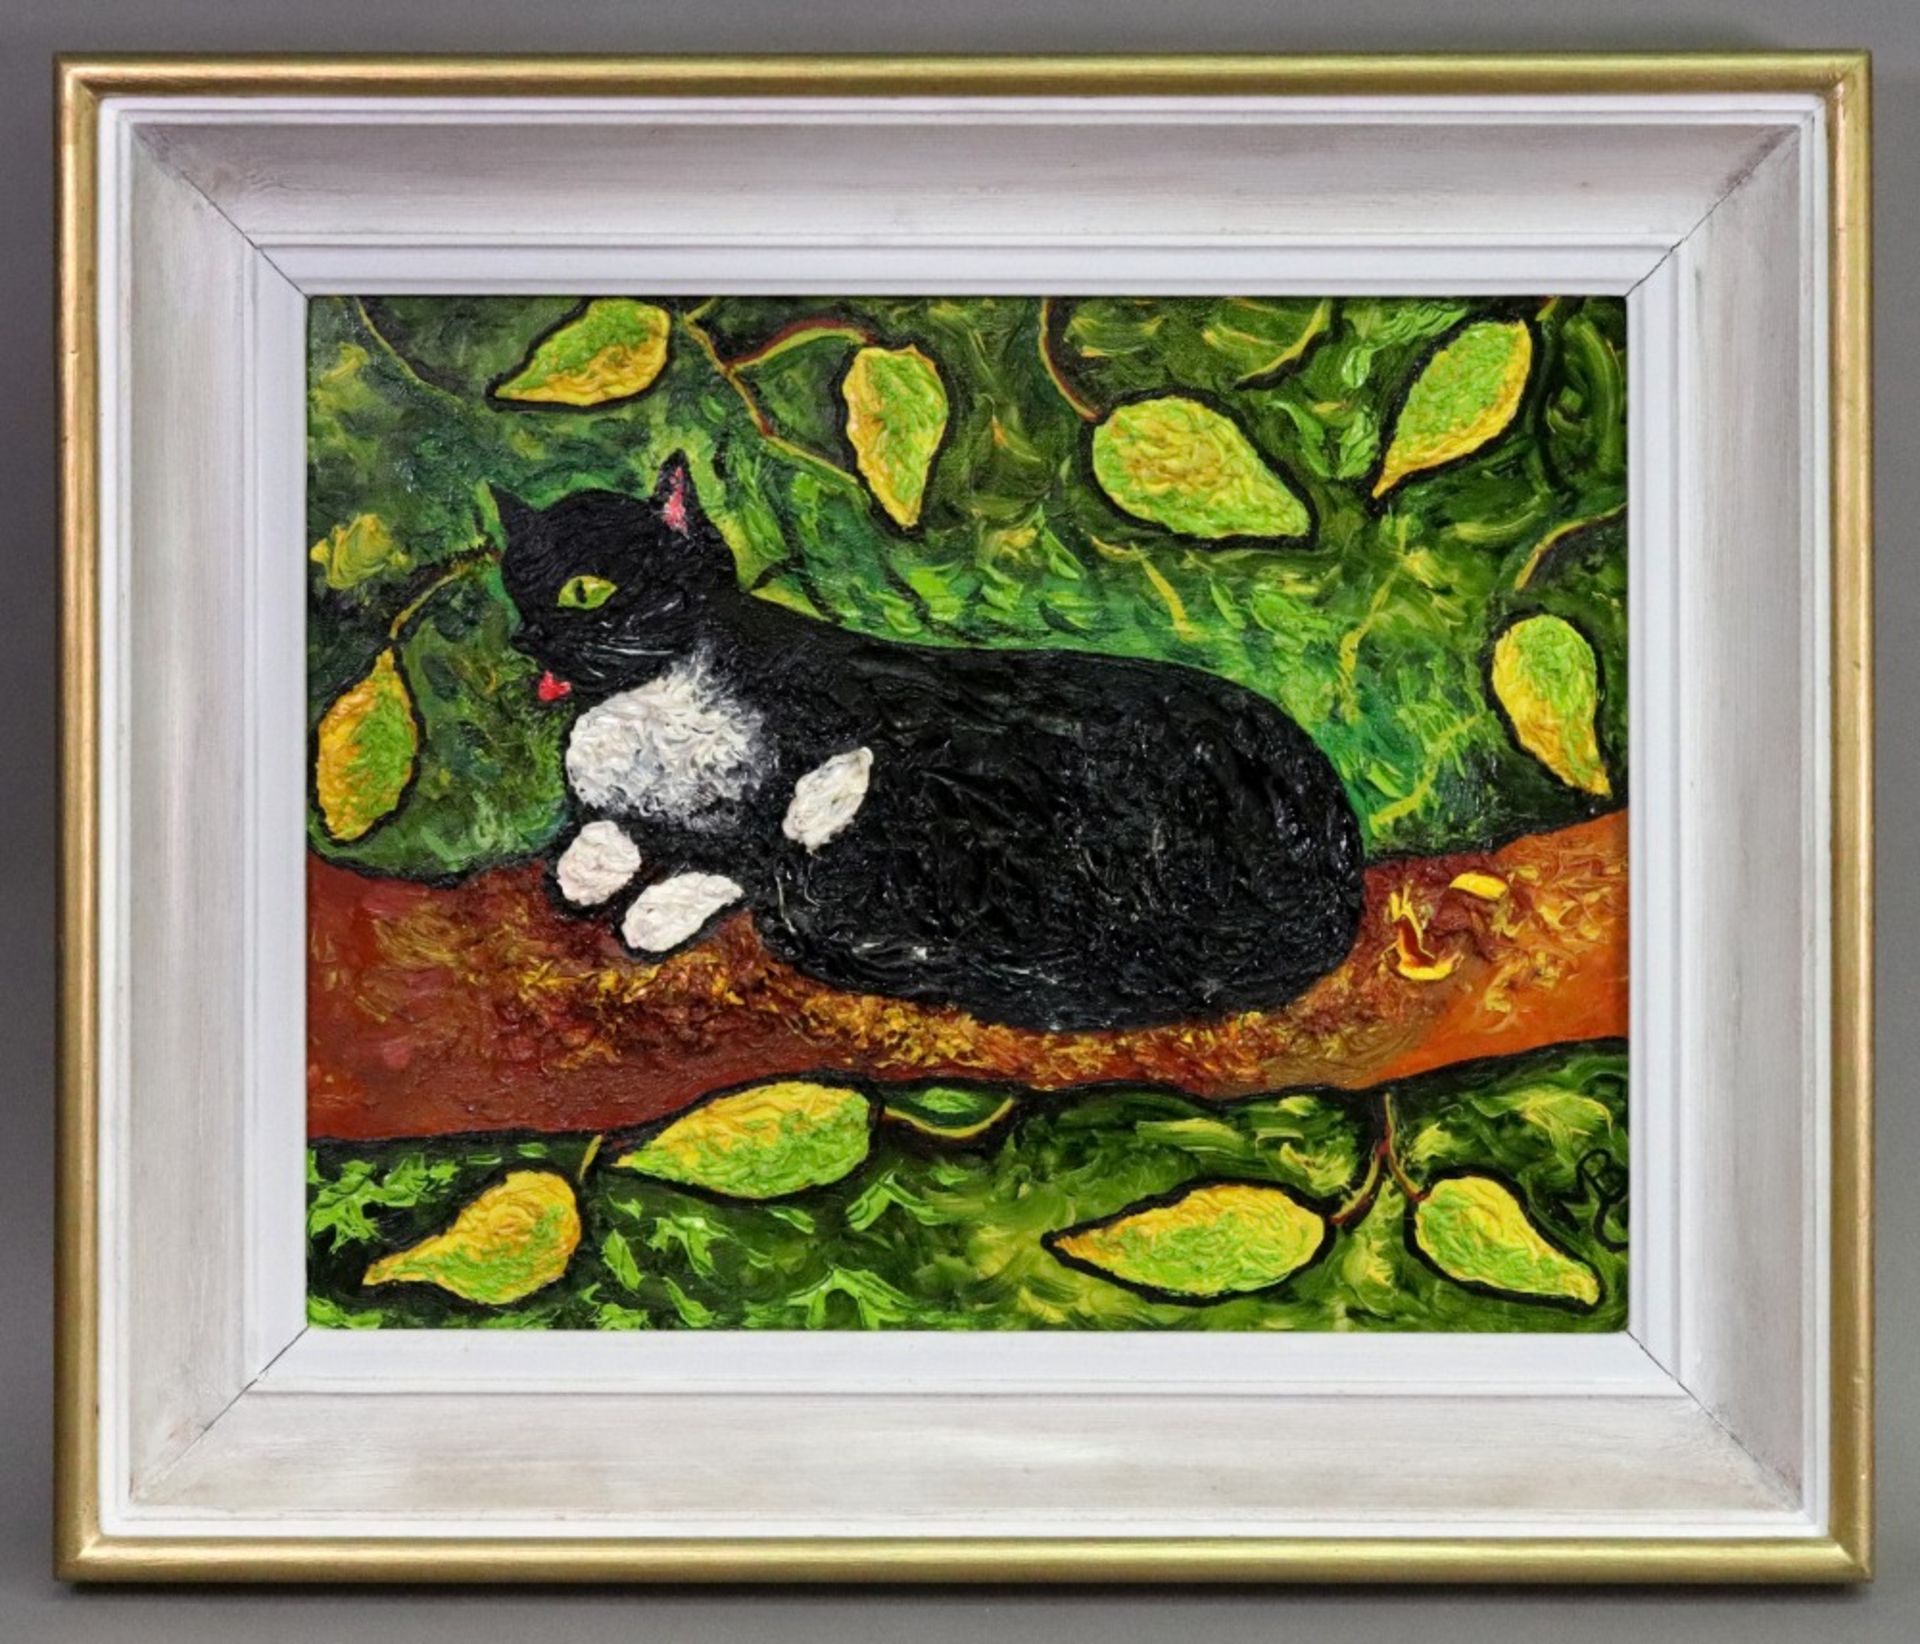 Maria Balfour (British, 1934-2007), A black cat seated on a branch, initialled 'M B' (lower right), - Image 2 of 2